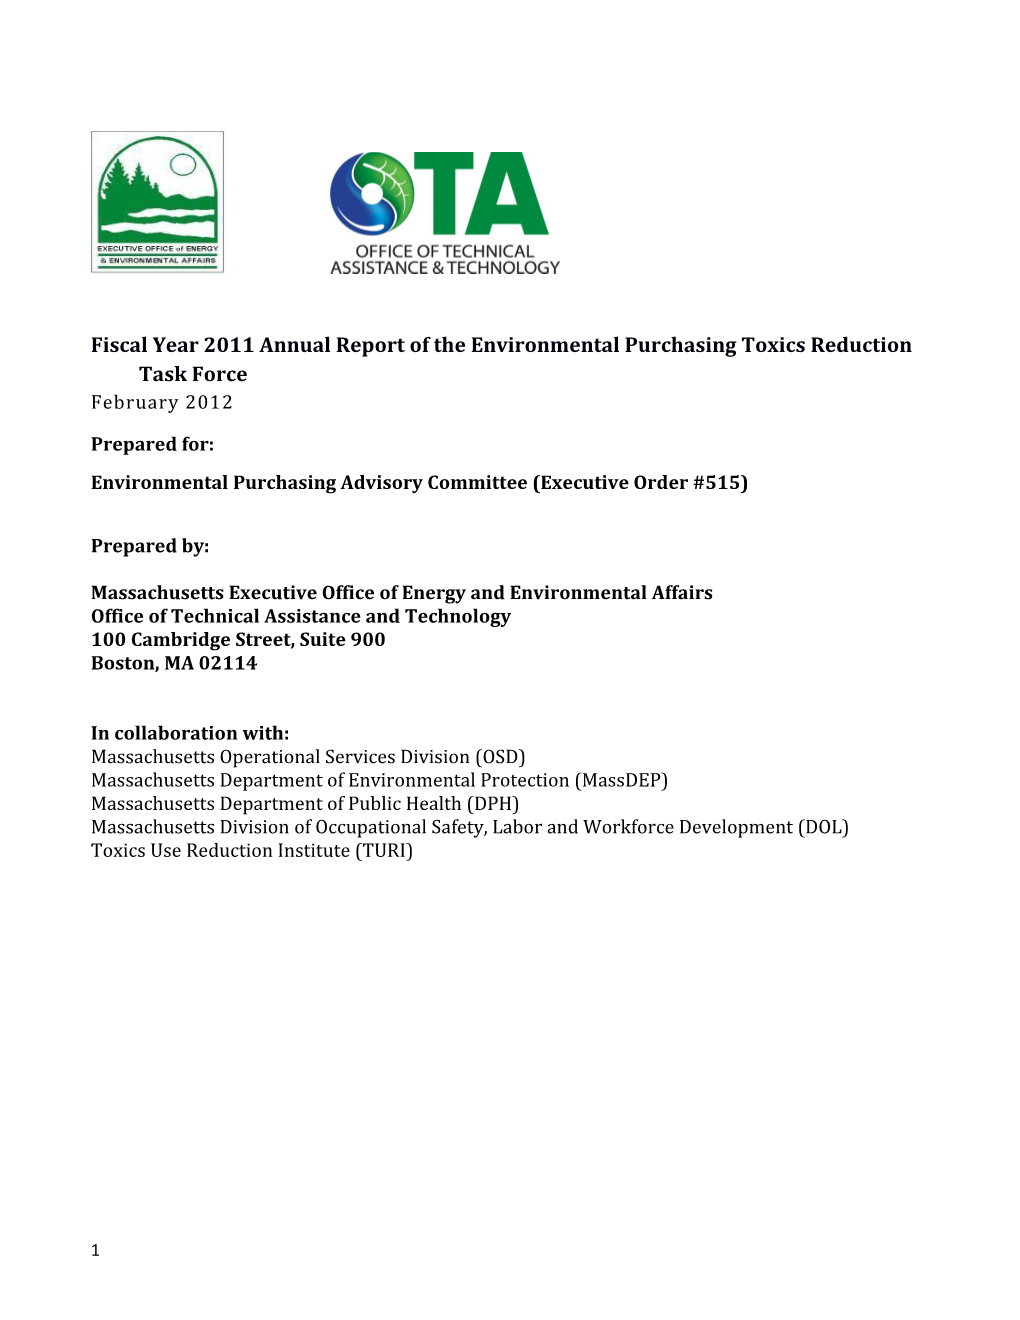 Toxics Reduction Task Force Progress Report to the Environment Purchasing Advisory Committee